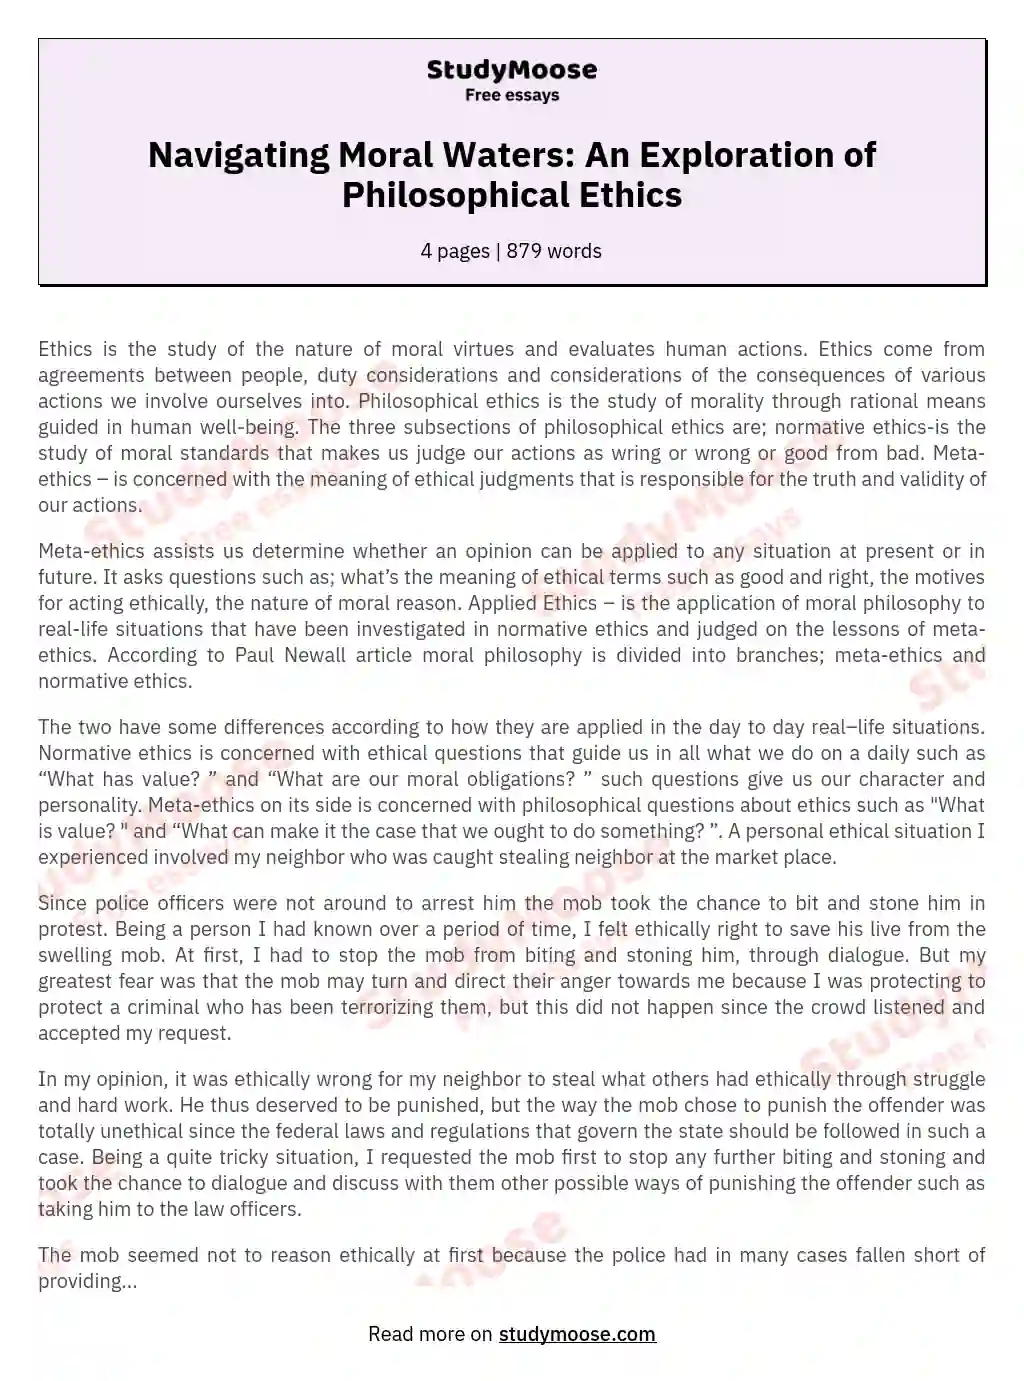 Navigating Moral Waters: An Exploration of Philosophical Ethics essay